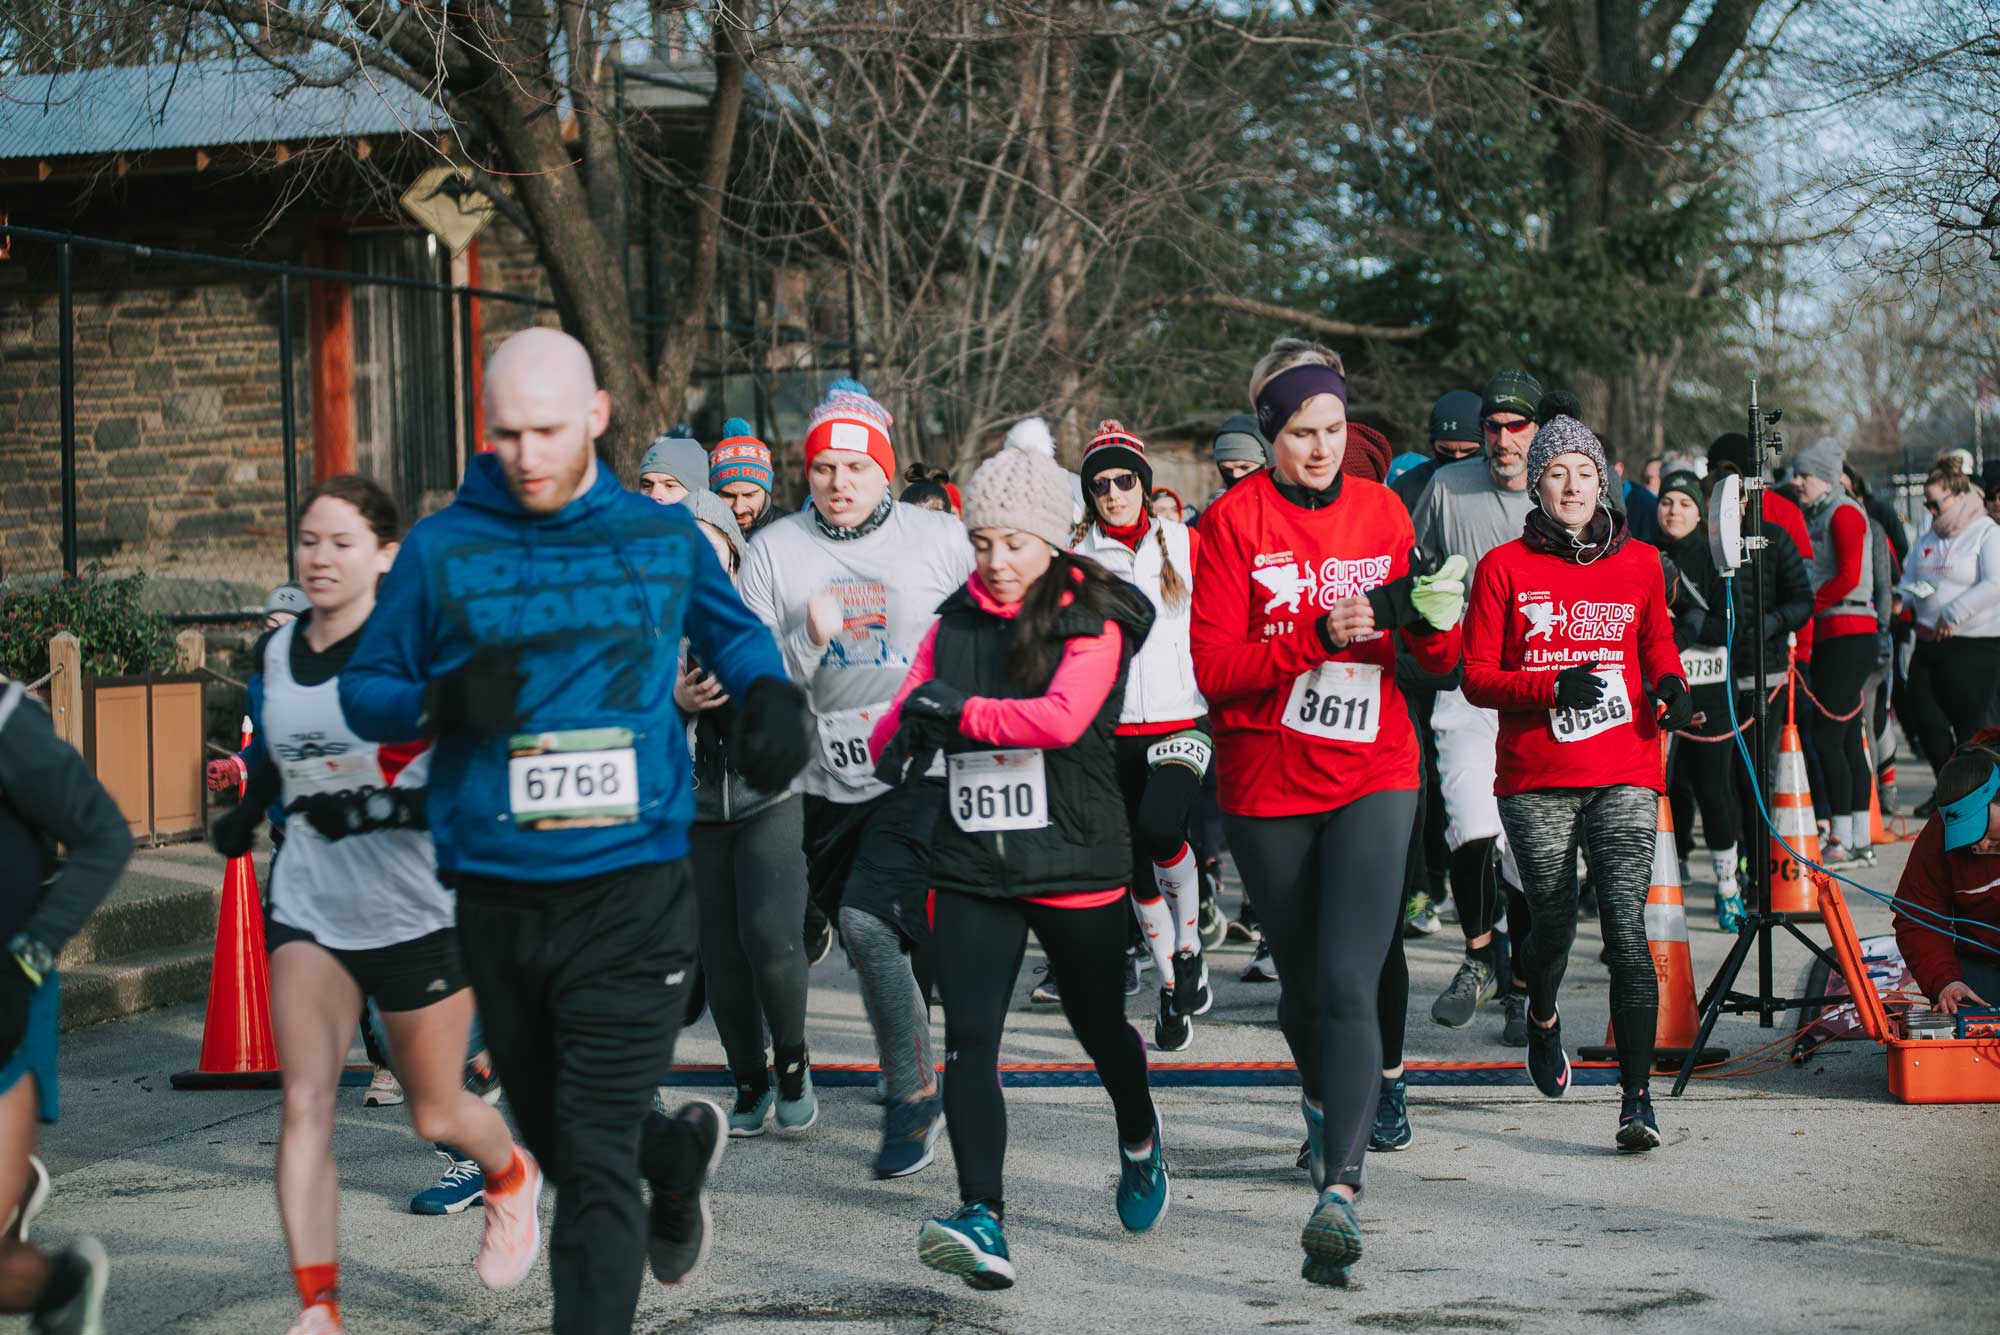 A large pack of runners at a Cupid's Chase 5k